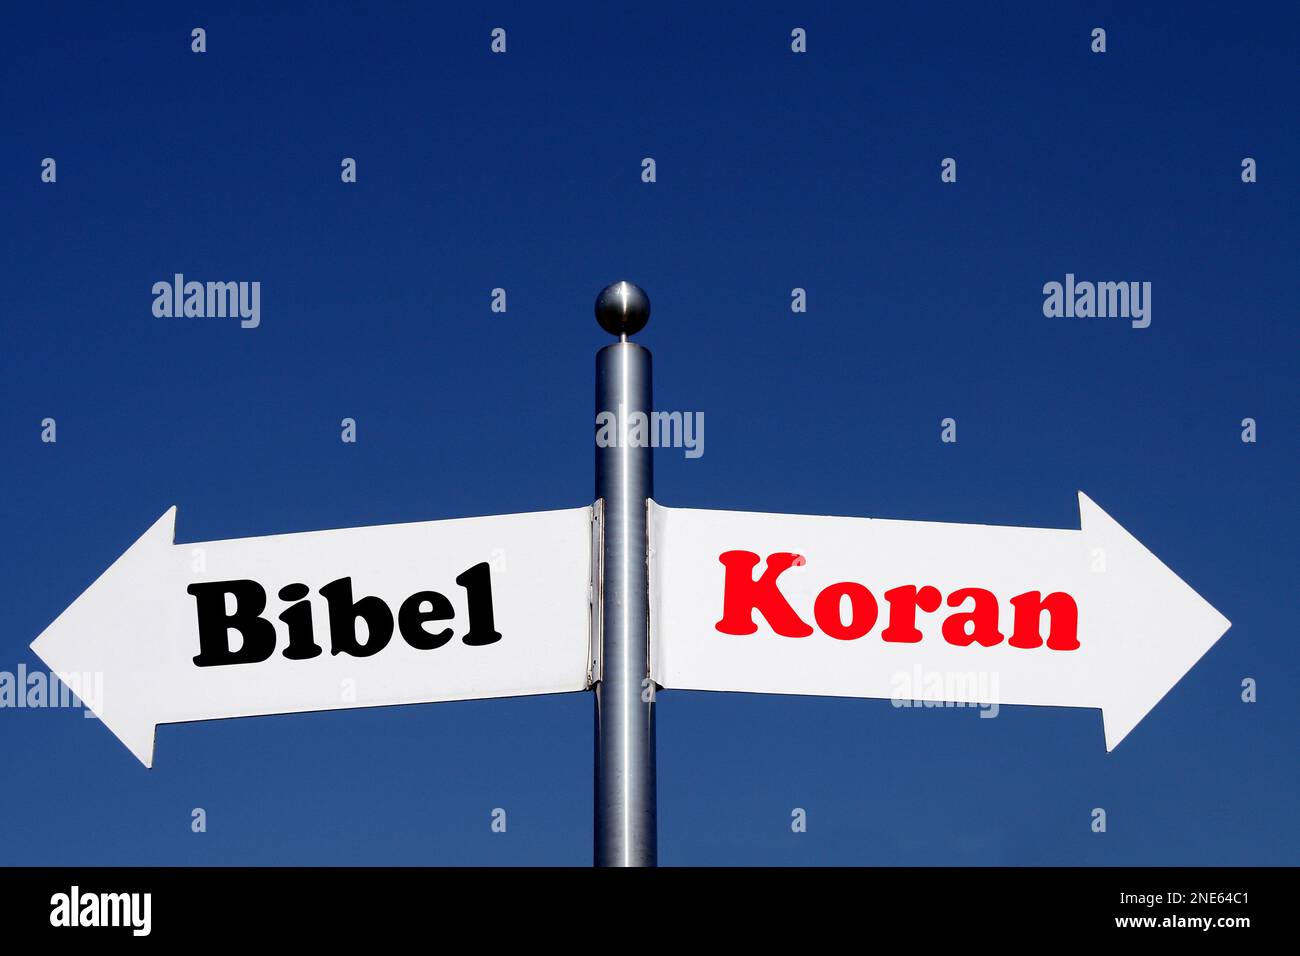 signposts pointing in different directions, options North bible - koran Stock Photo